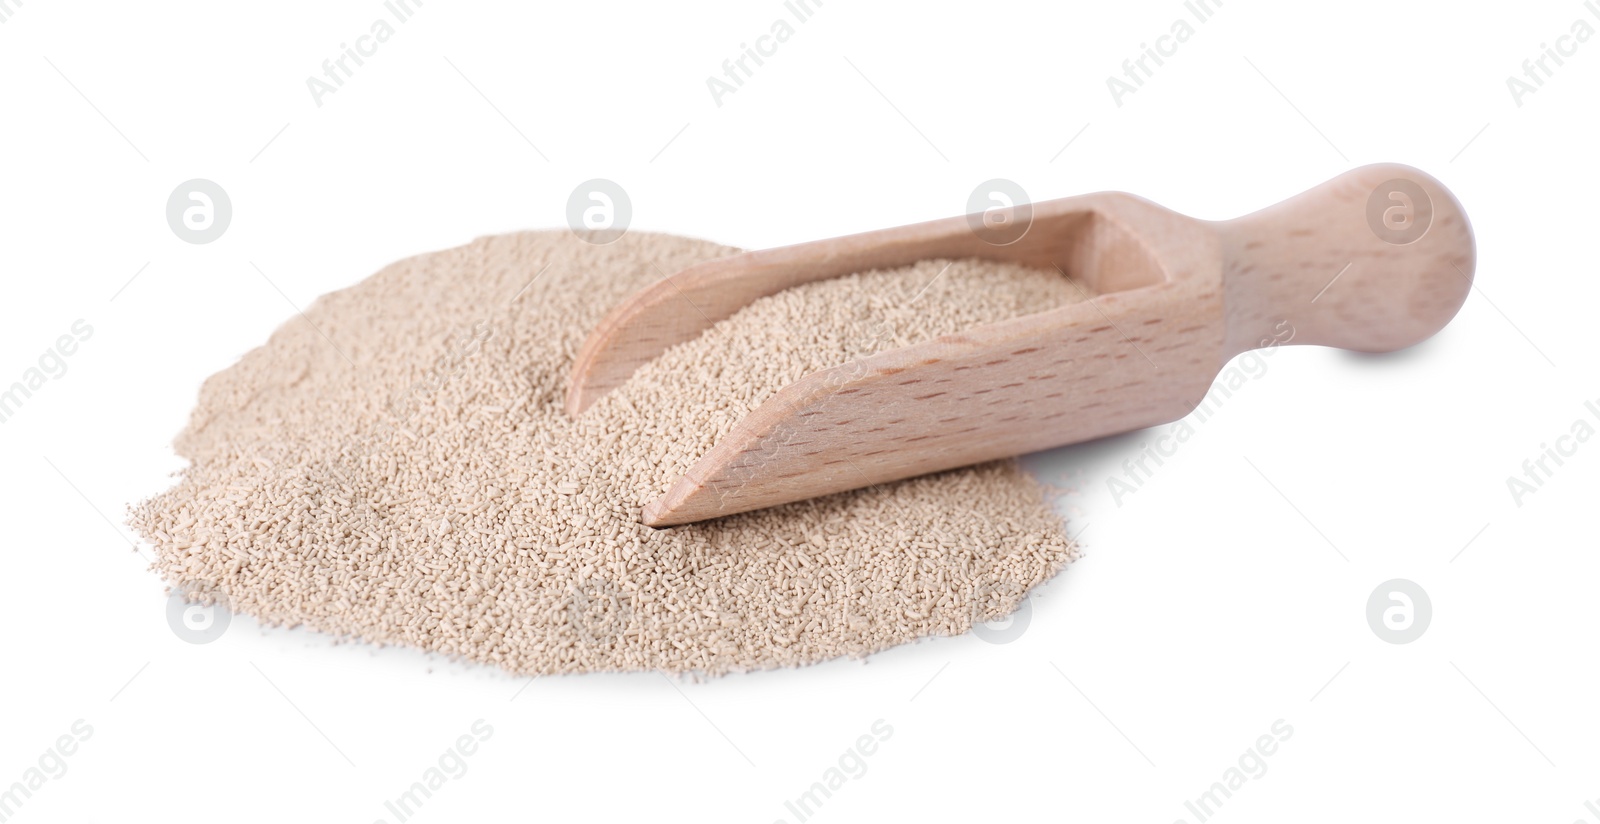 Photo of Wooden scoop with active dry yeast isolated on white